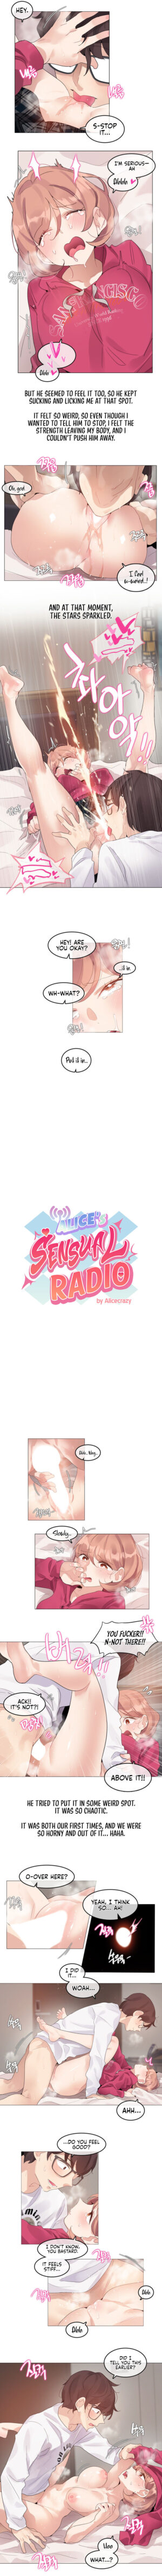 [Alice] Alice's Sensual Radio (1-13) [English] [Omega Scans] [Ongoing]